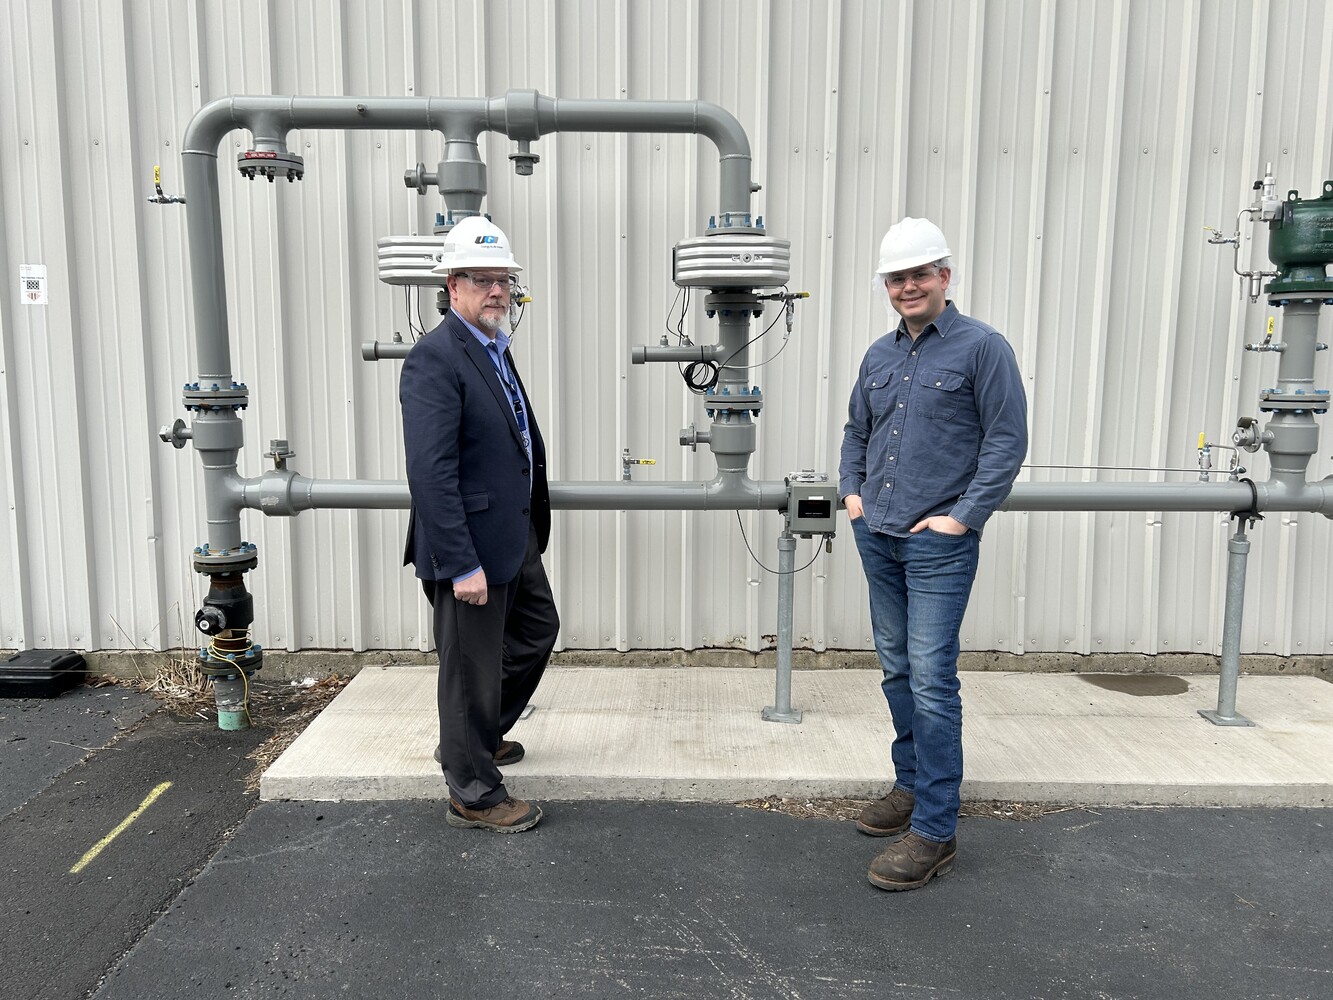 UGI employee and brewery employee stand in front of gas meter.